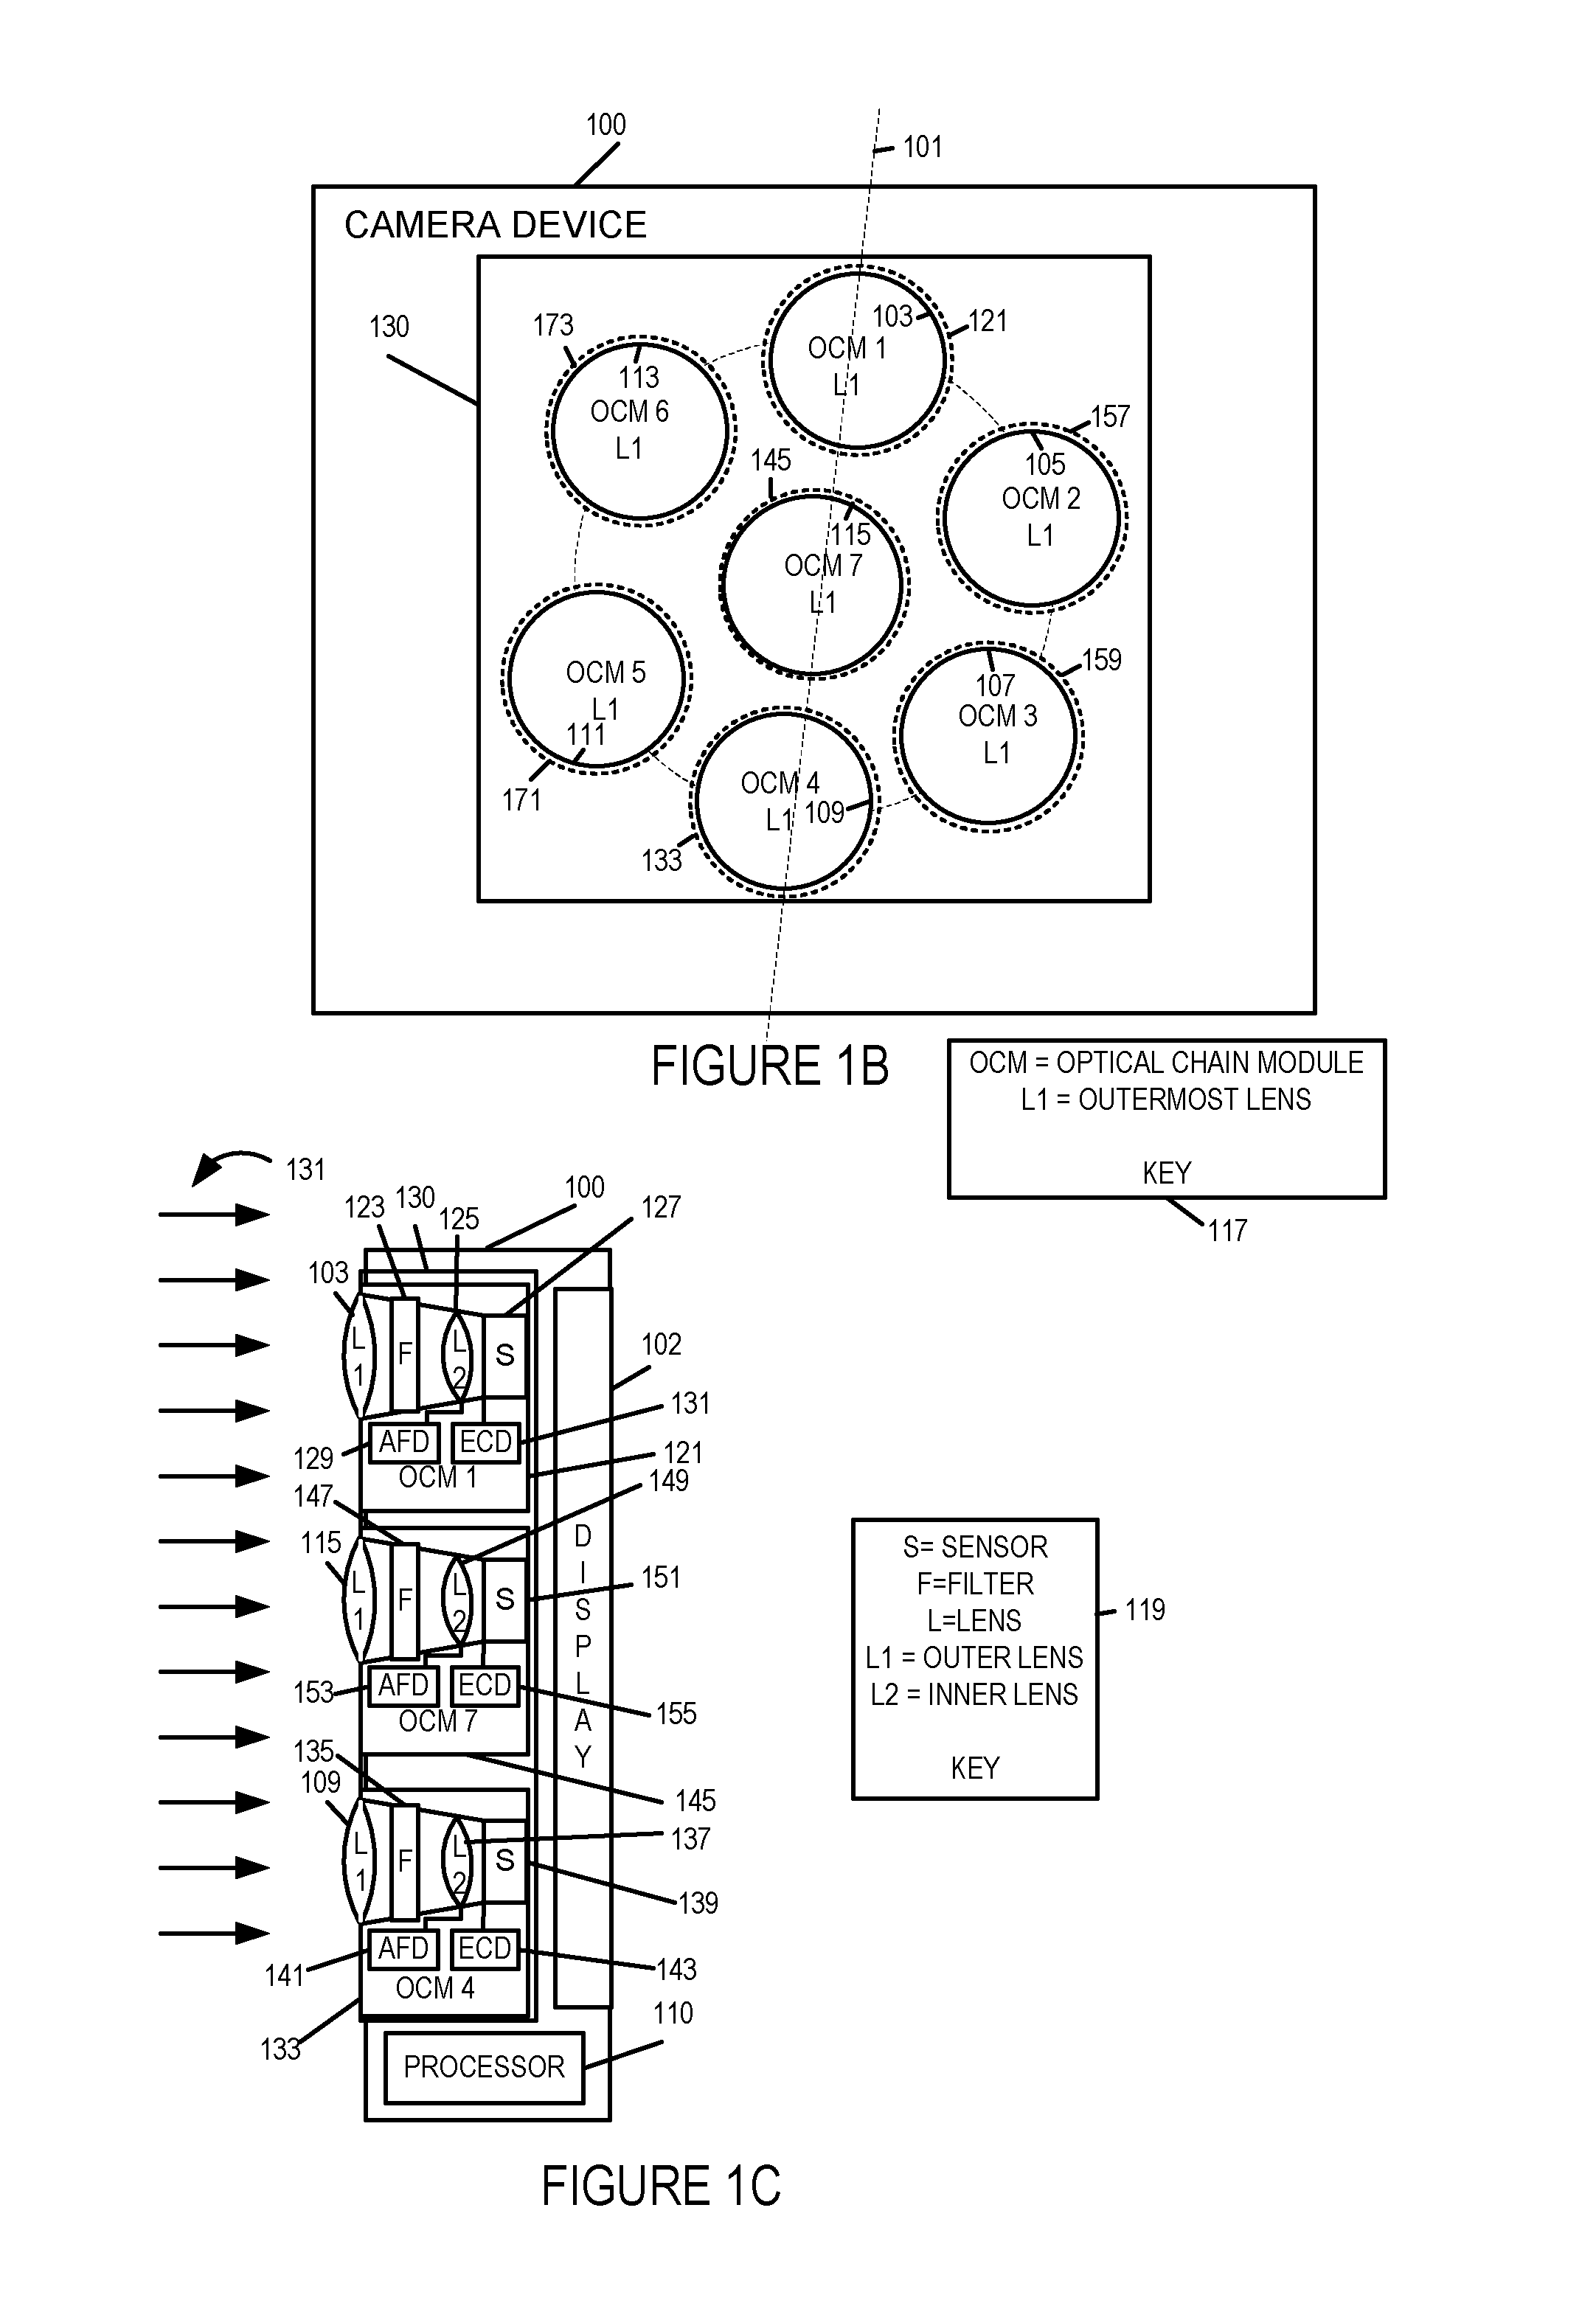 Methods and apparatus for using multiple optical chains in paralell